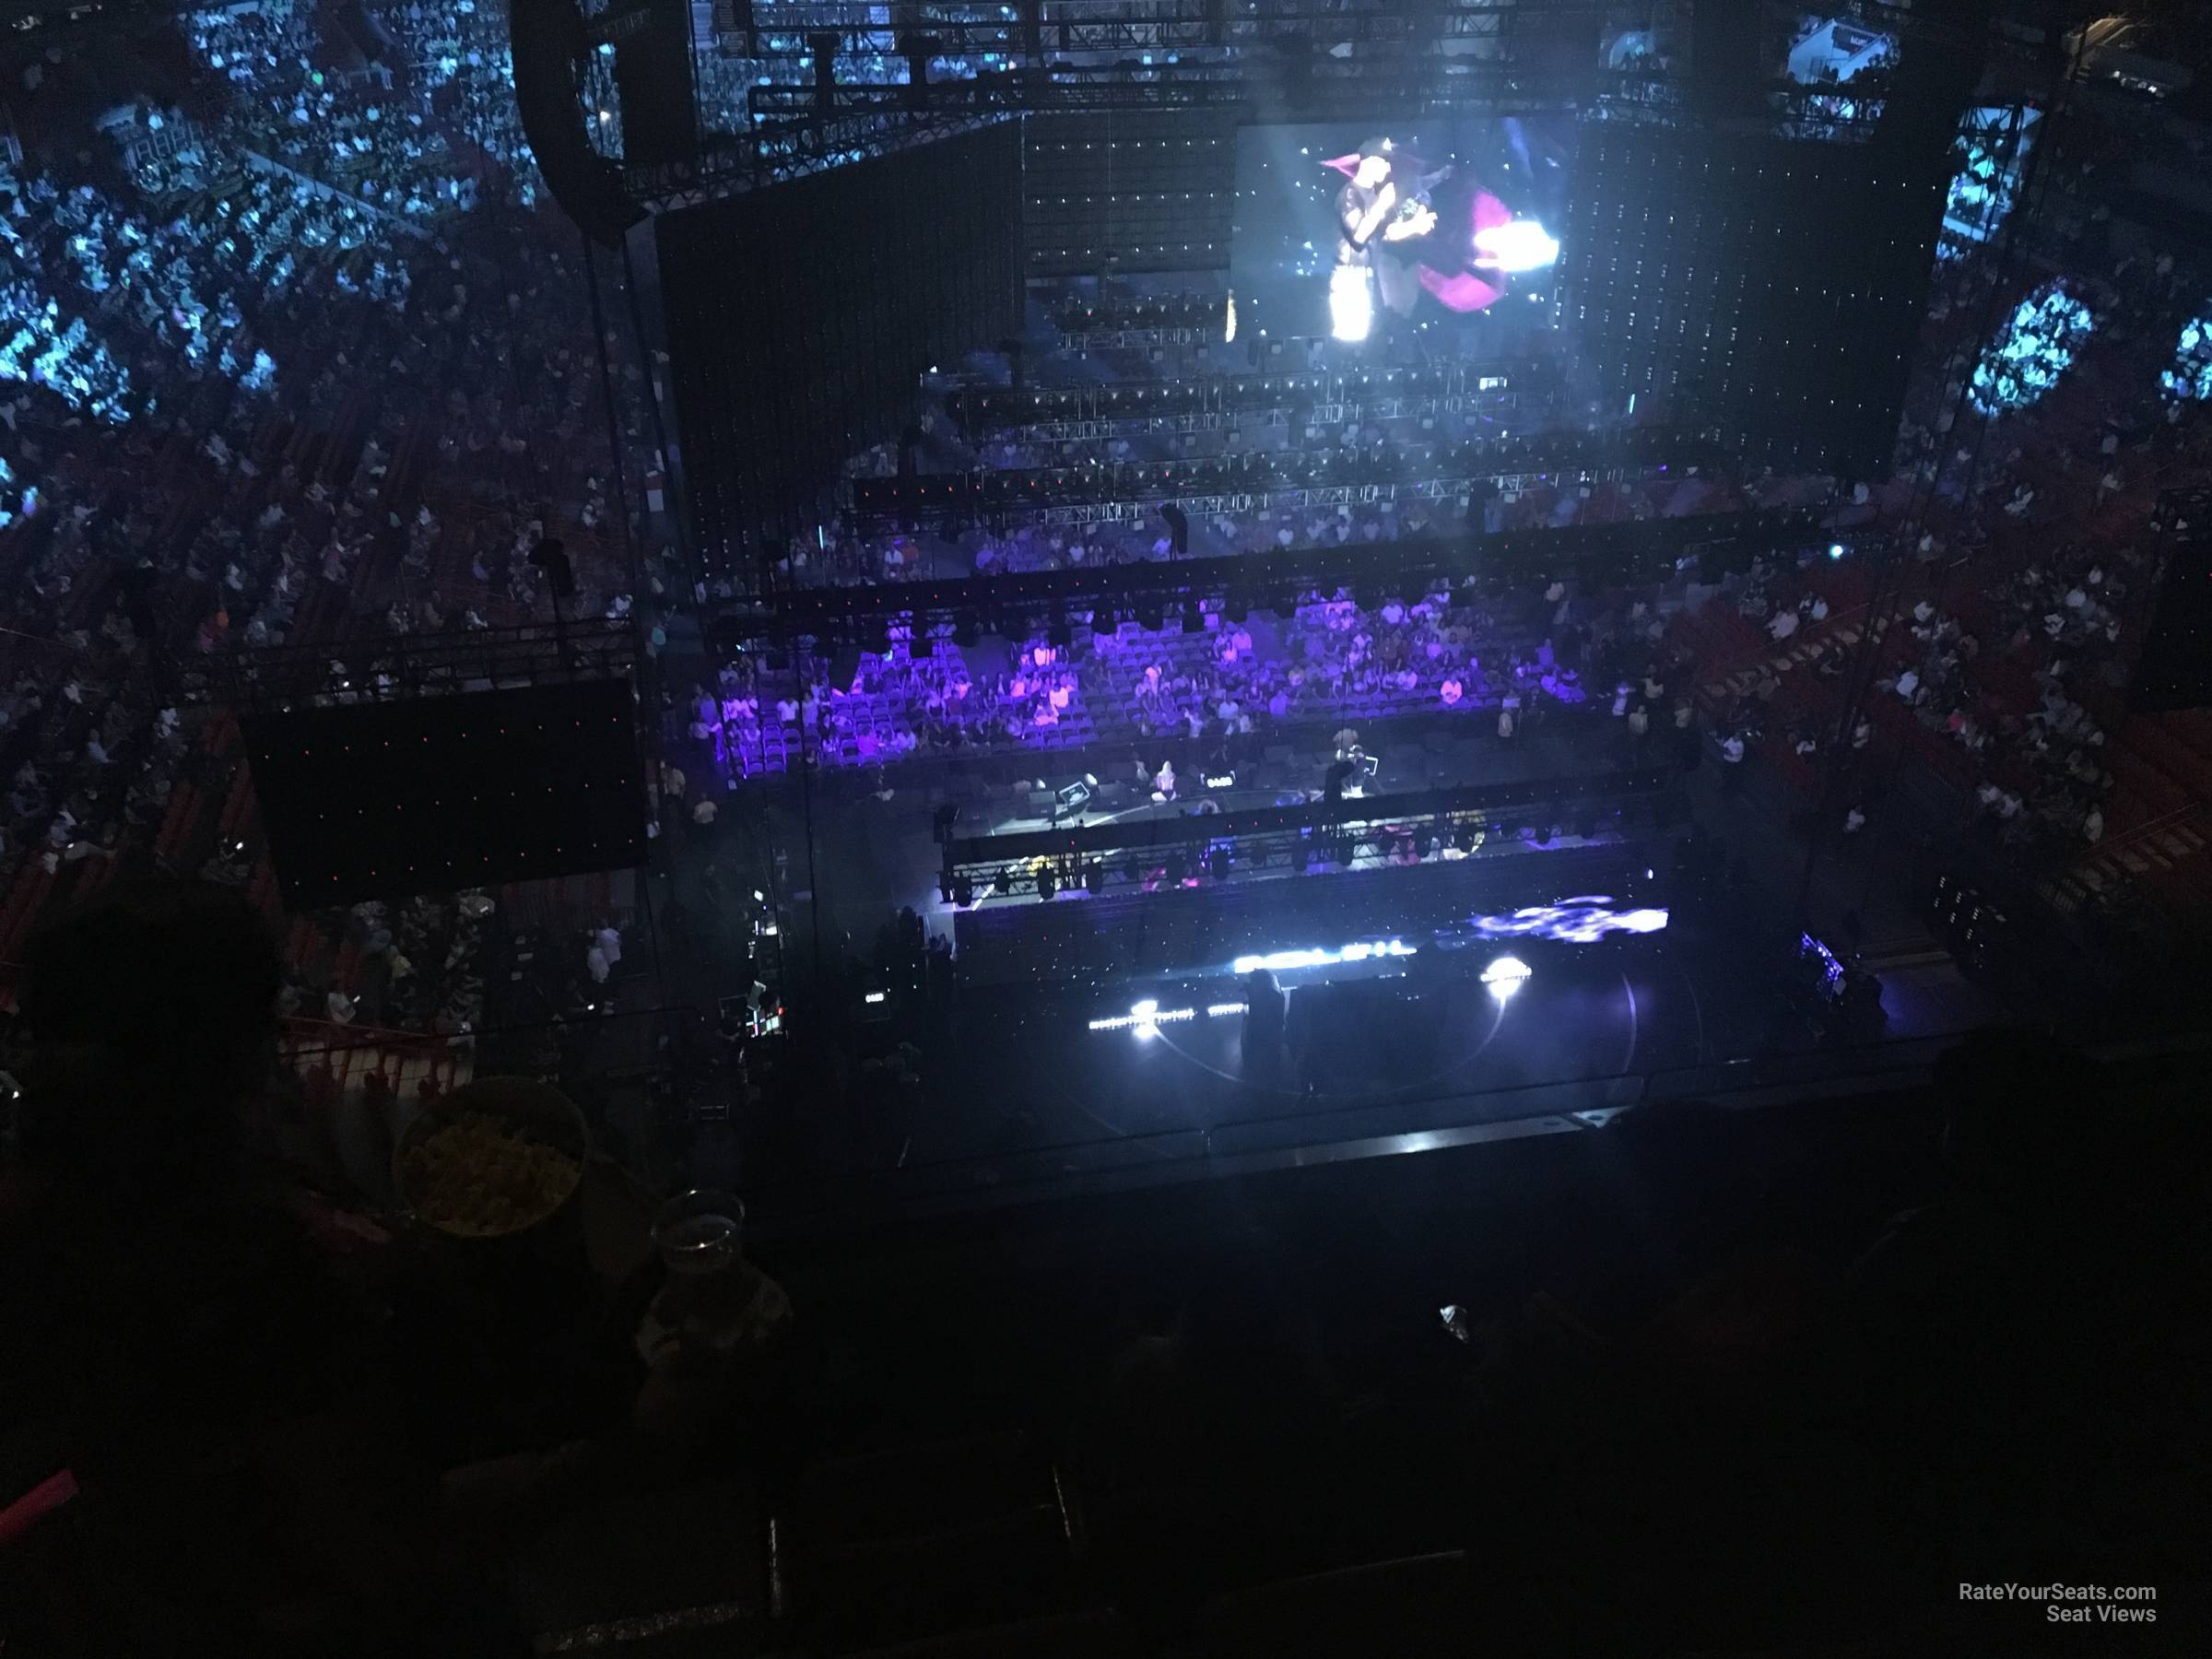 section 406, row 4 seat view  for concert - kaseya center